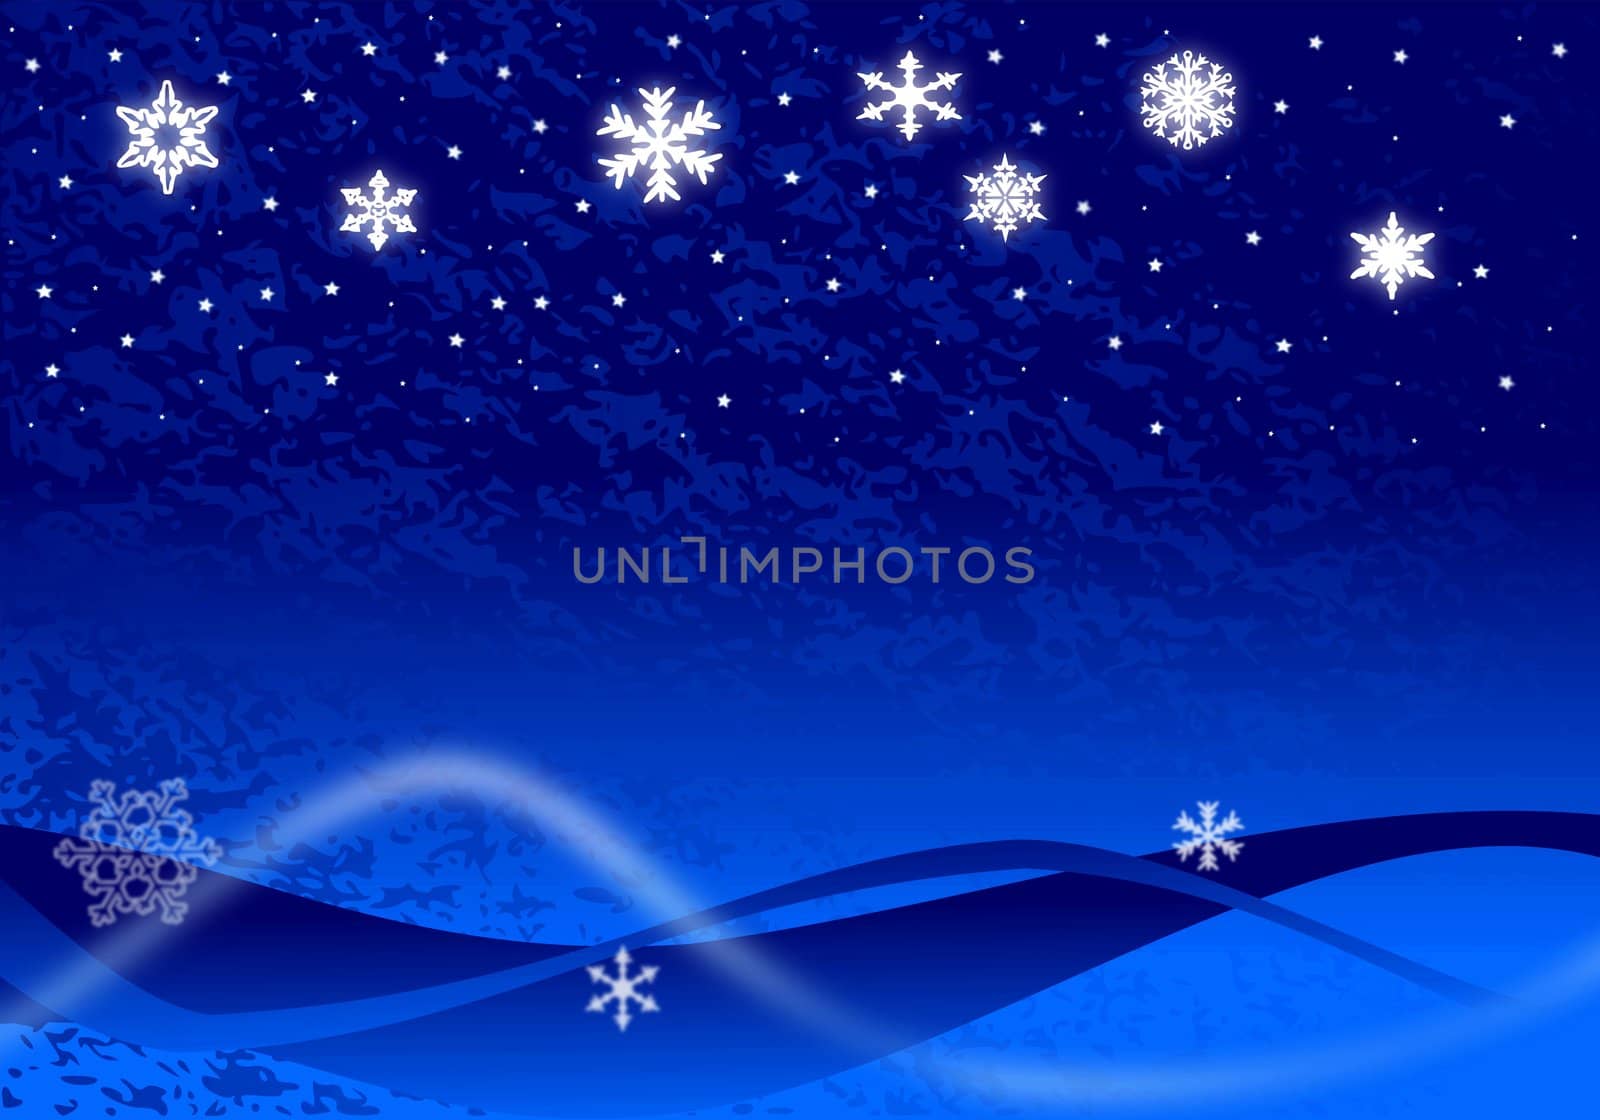 Christmas illustration of glowing snowflakes and stars with abstract snow drifts and blowing snow on blue.